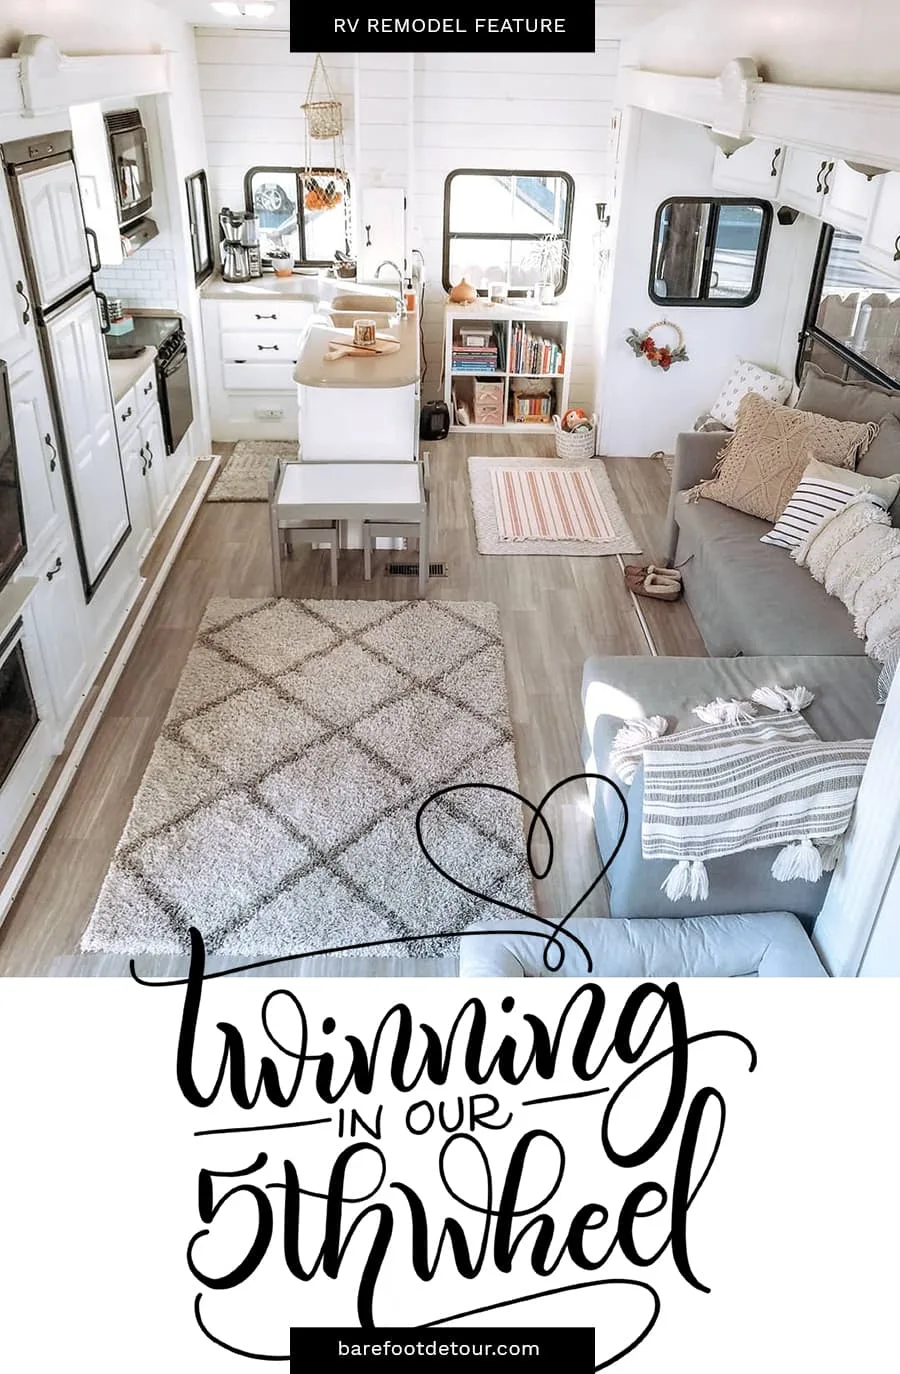 Modern Rv Remodel Twinning In Our